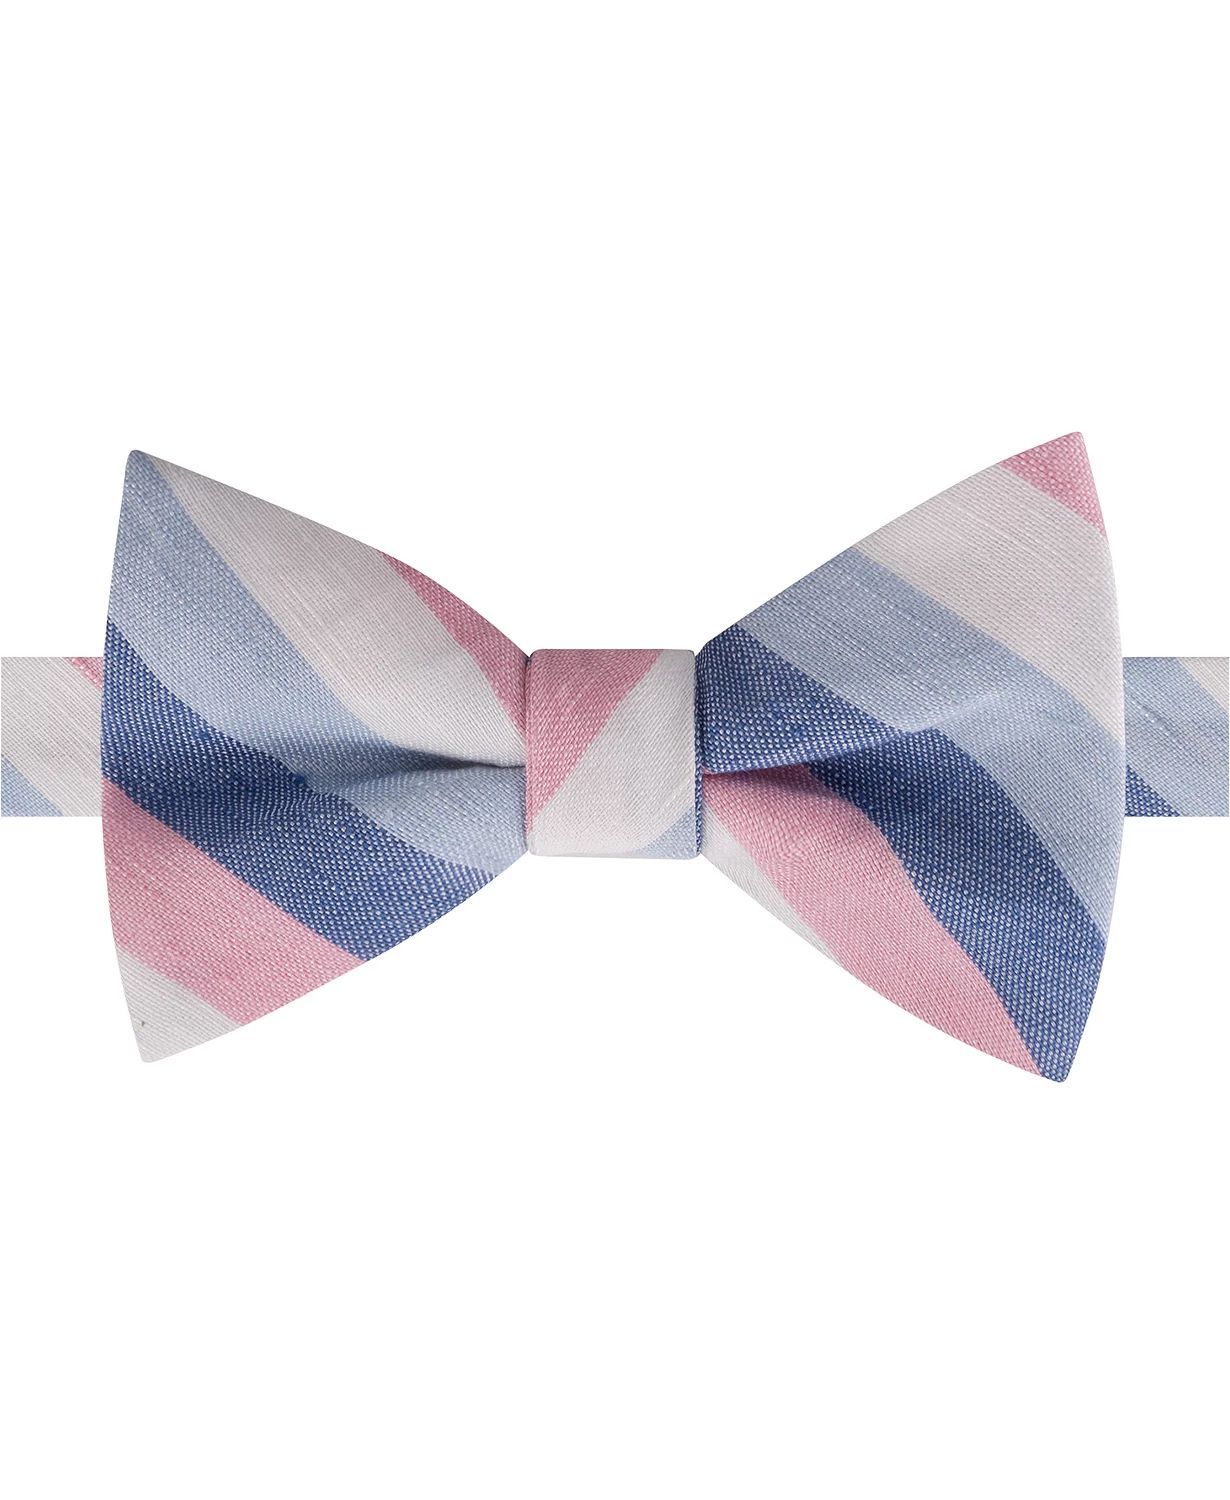 Color: Blues Size: One Size Pattern: Striped Type: Bow Tie Material: Linen Blends